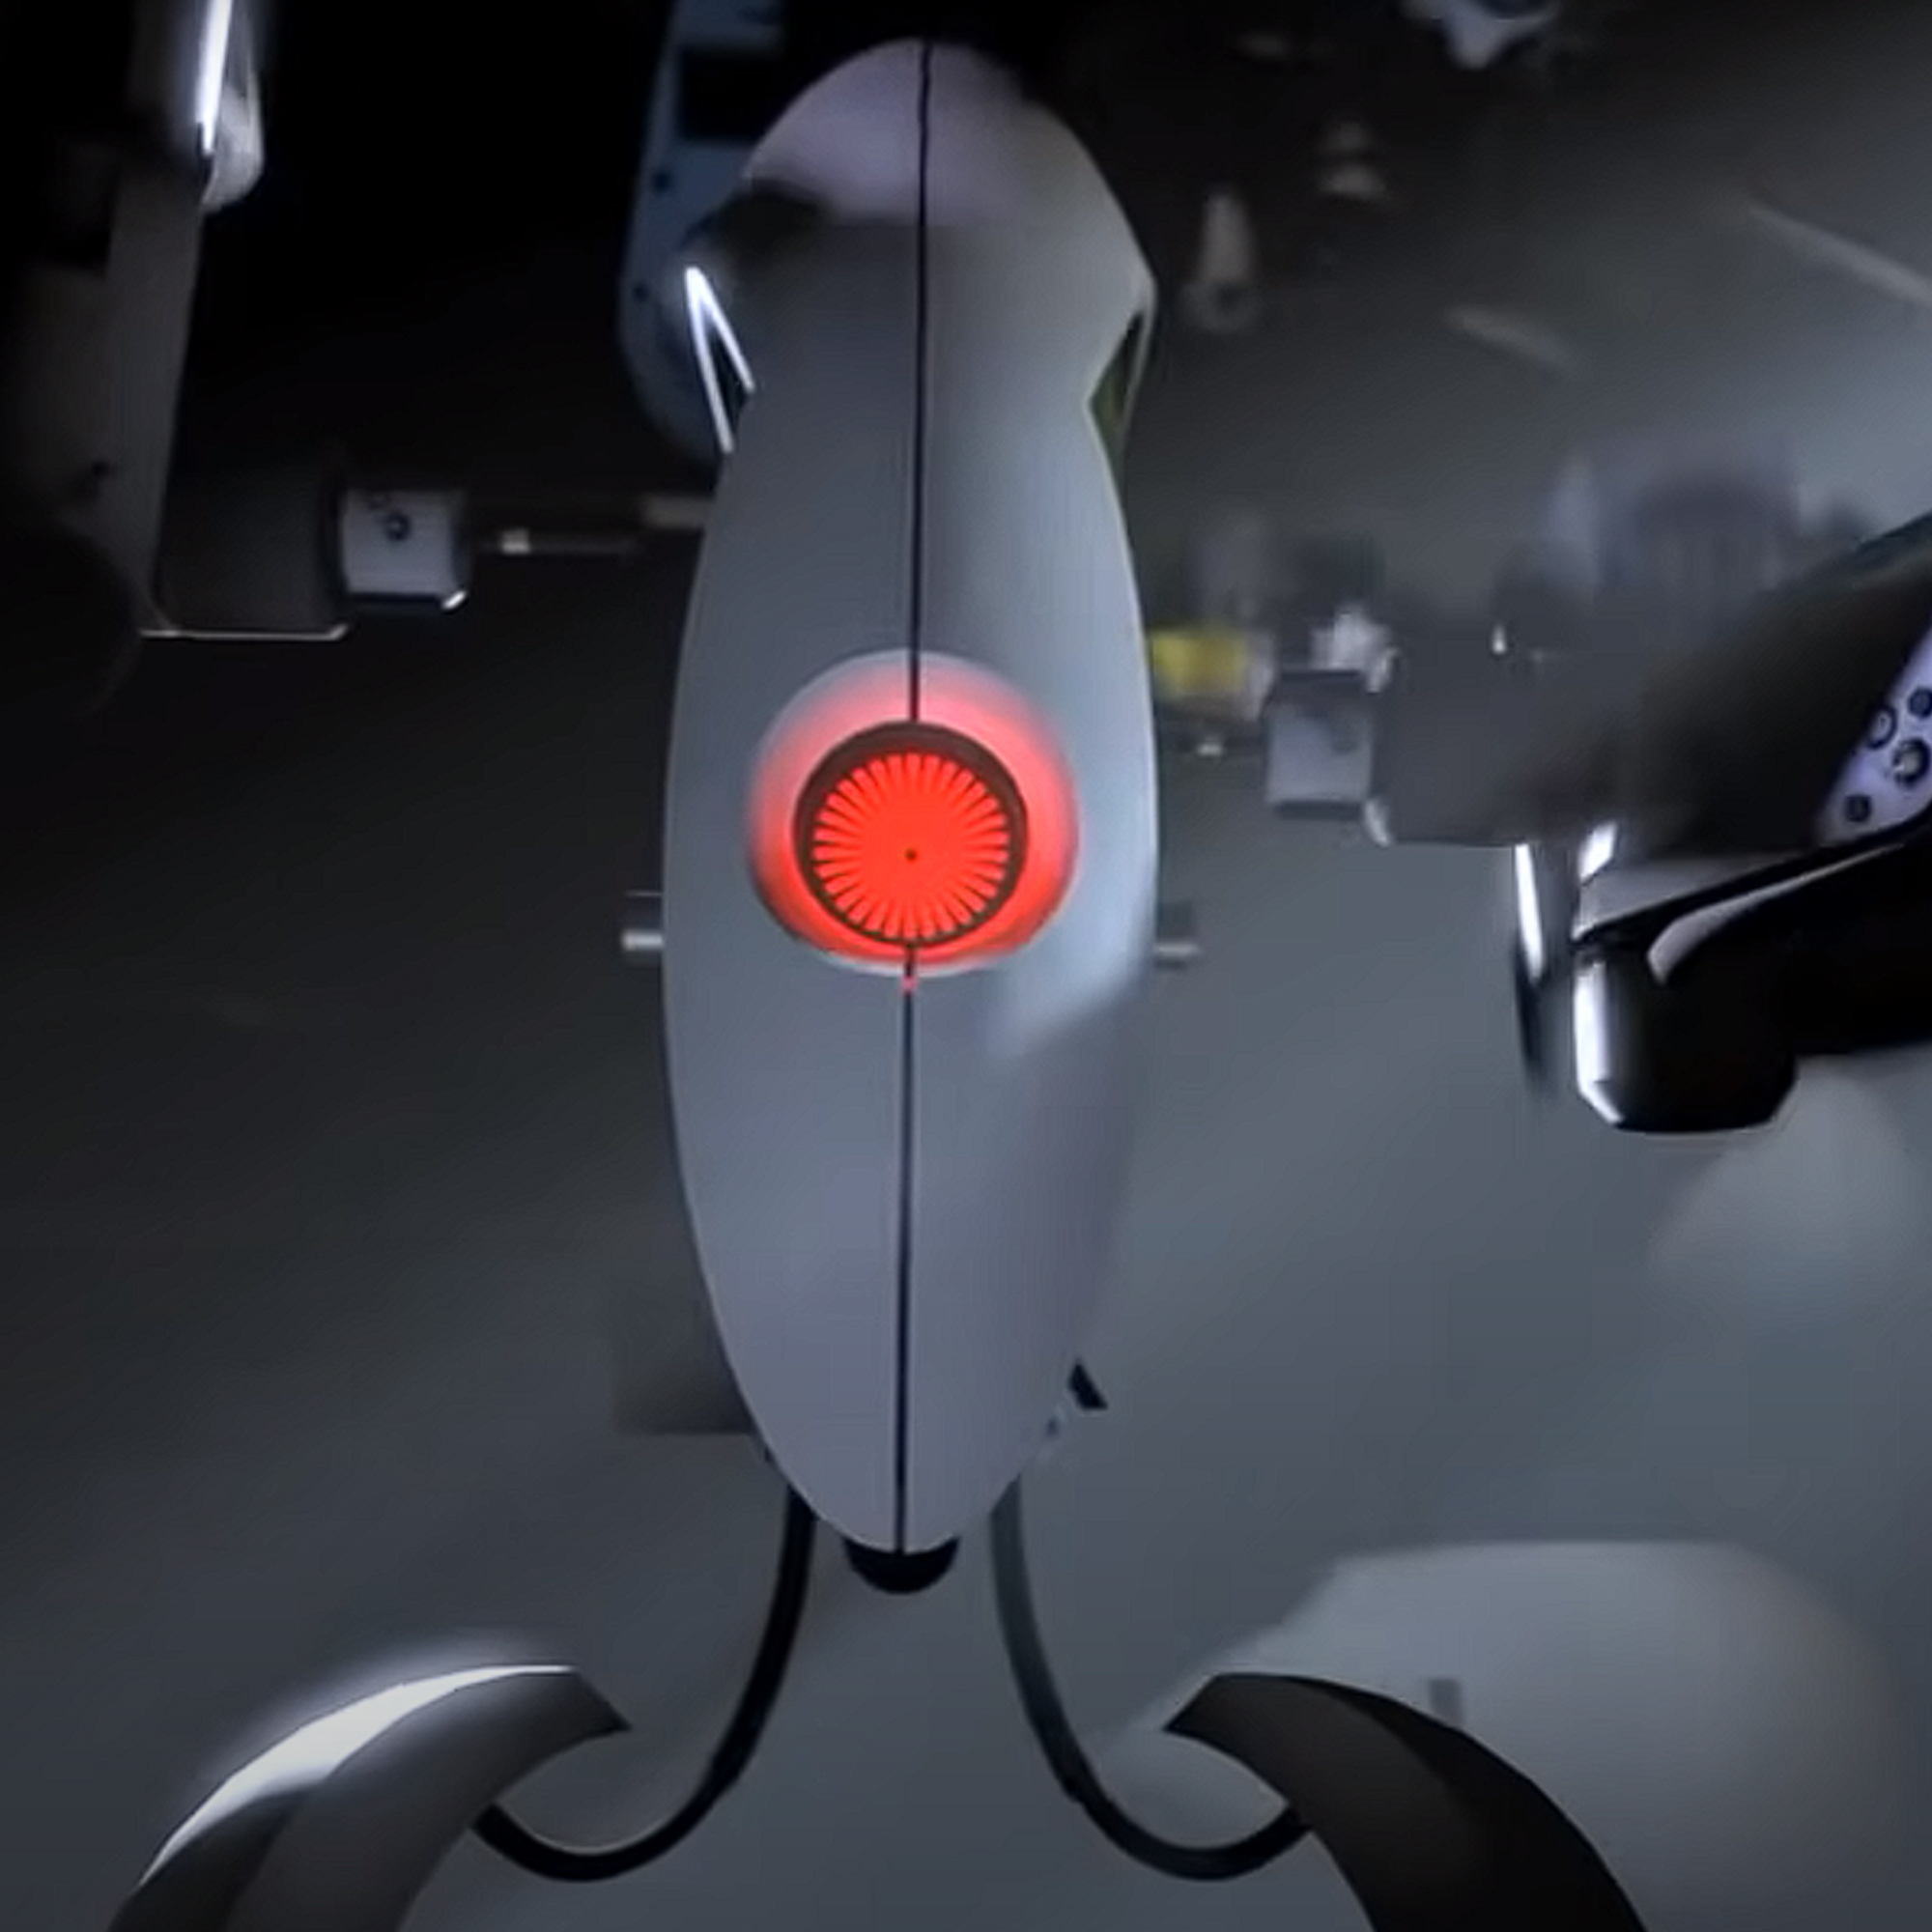 The Aperture Science Handheld Portal Device from "Portal 2" | Source: youtube.com/Valve